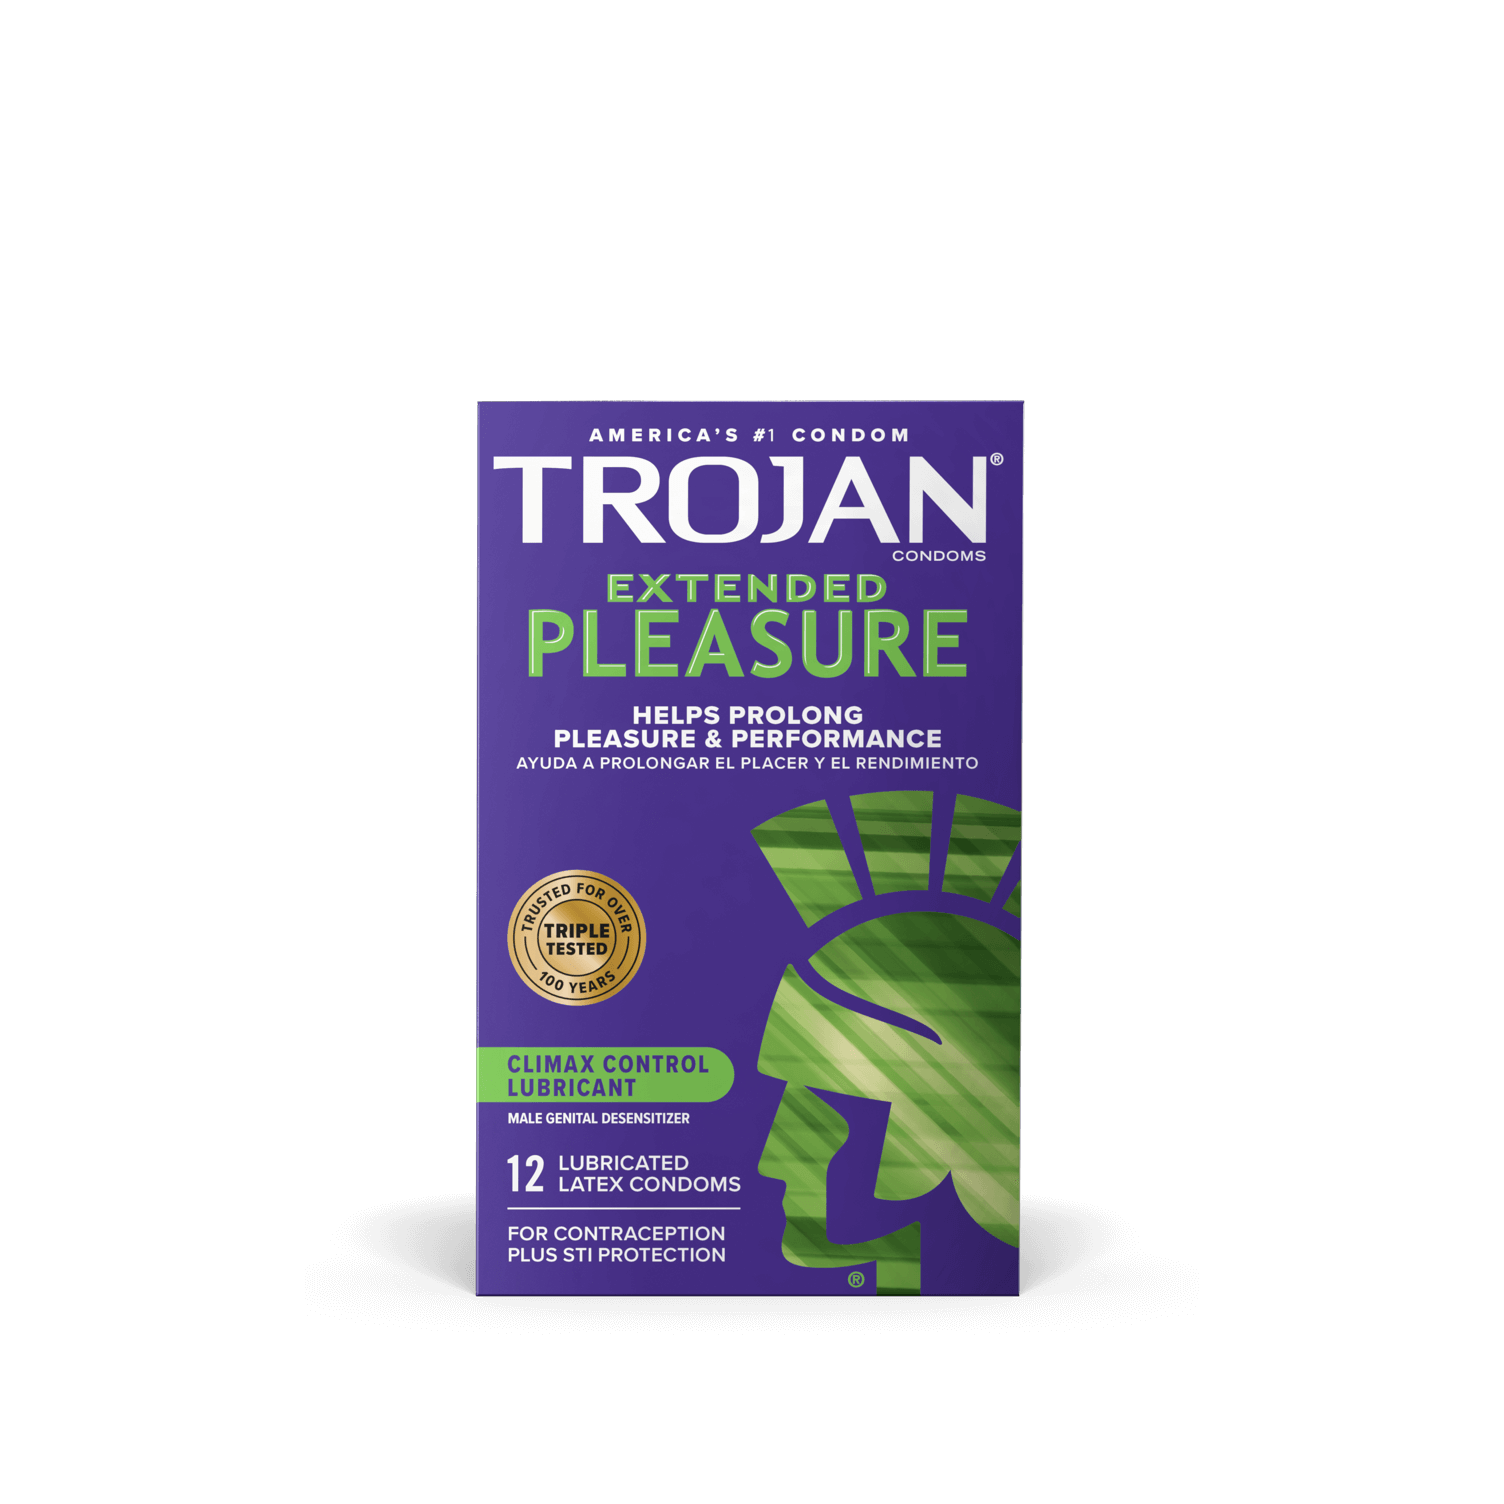 Trojan Extended Pleasure Condoms with Climax Control Lubricant.